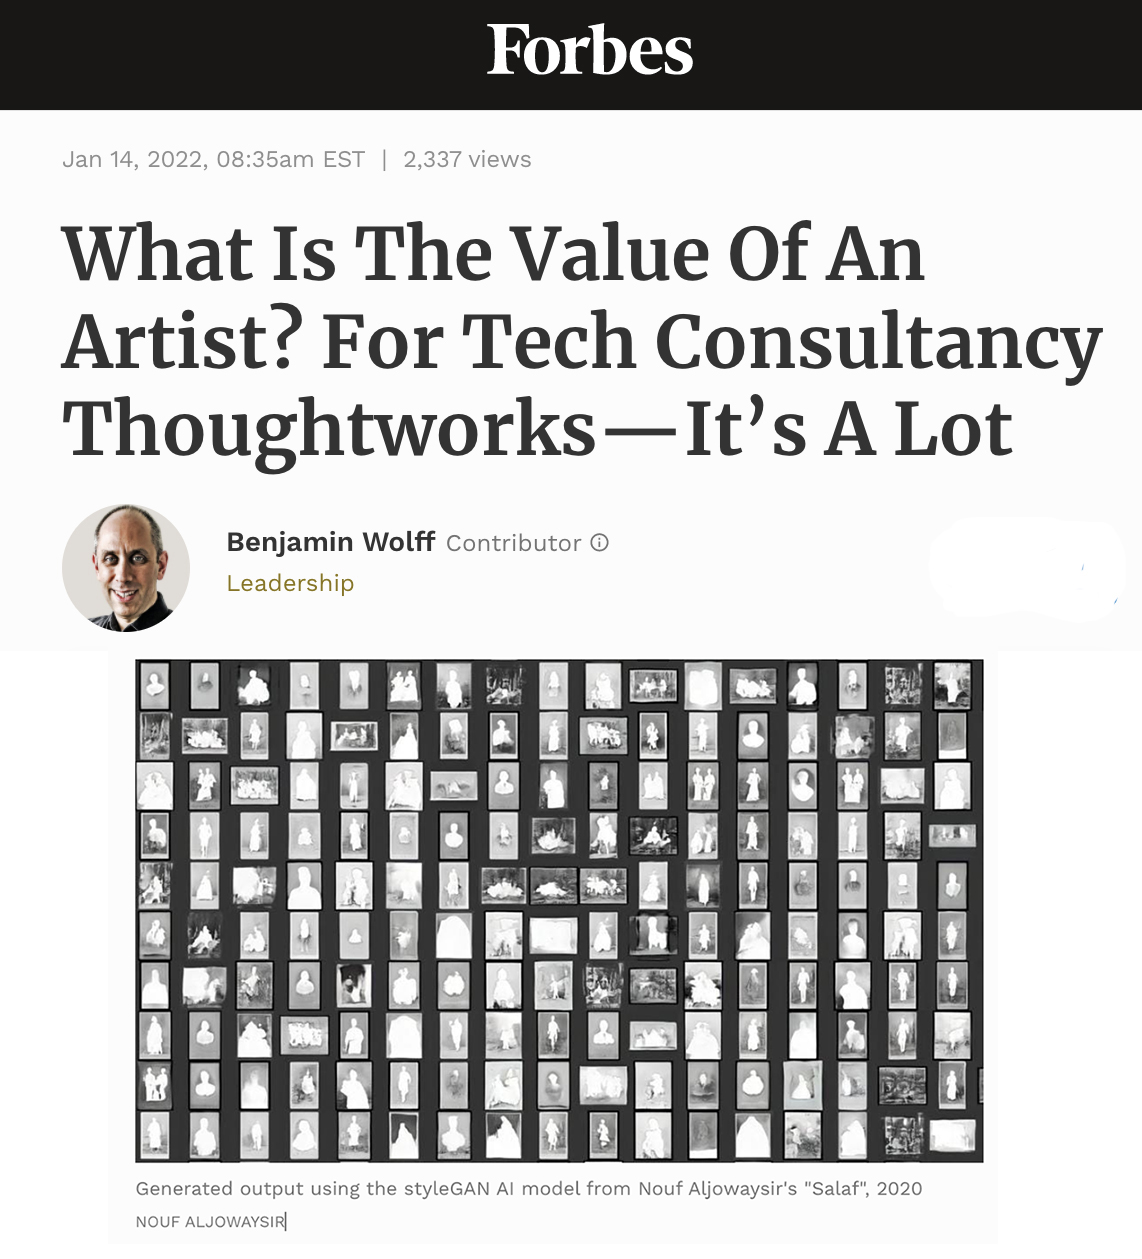 A screenshot of the Forbes article headline with the text “What Is The Value Of An Artist? For Tech Consultancy Thoughtworks—It’s A Lot” and a picture of an AI-generated artwork by Nouf Aljowaysir